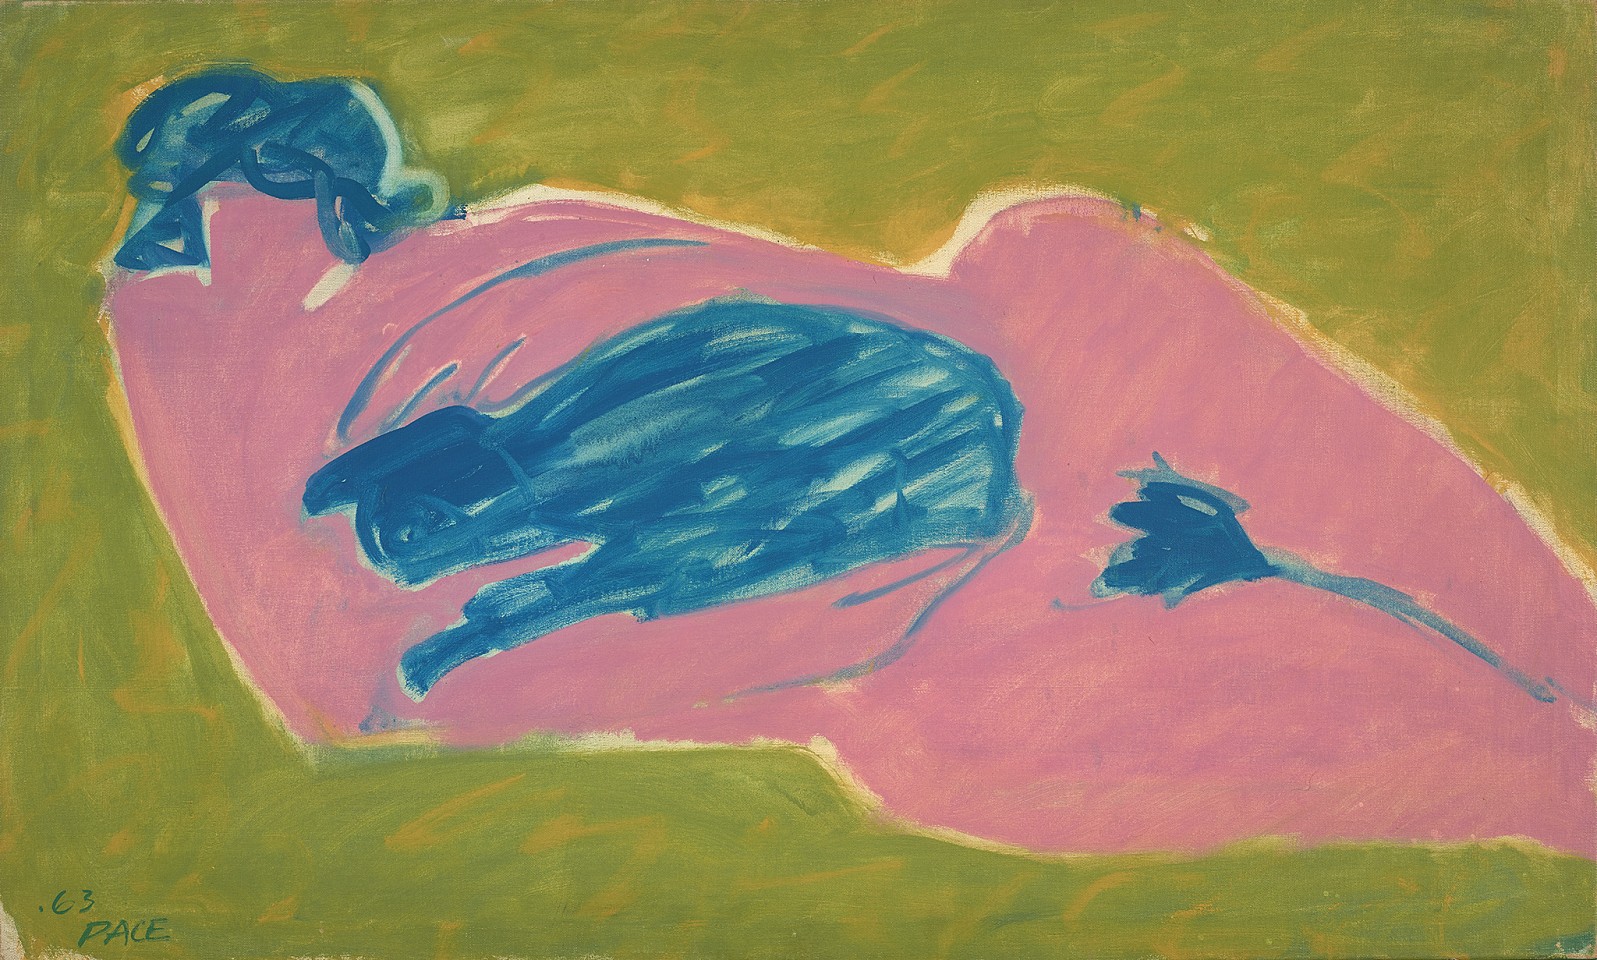 Stephen Pace, Pink Nude with Blue Cat (63-7), 1963
Oil on canvas, 26 x 43 x 3/4 in. (66 x 109.2 x 1.9 cm)
PAC-00252